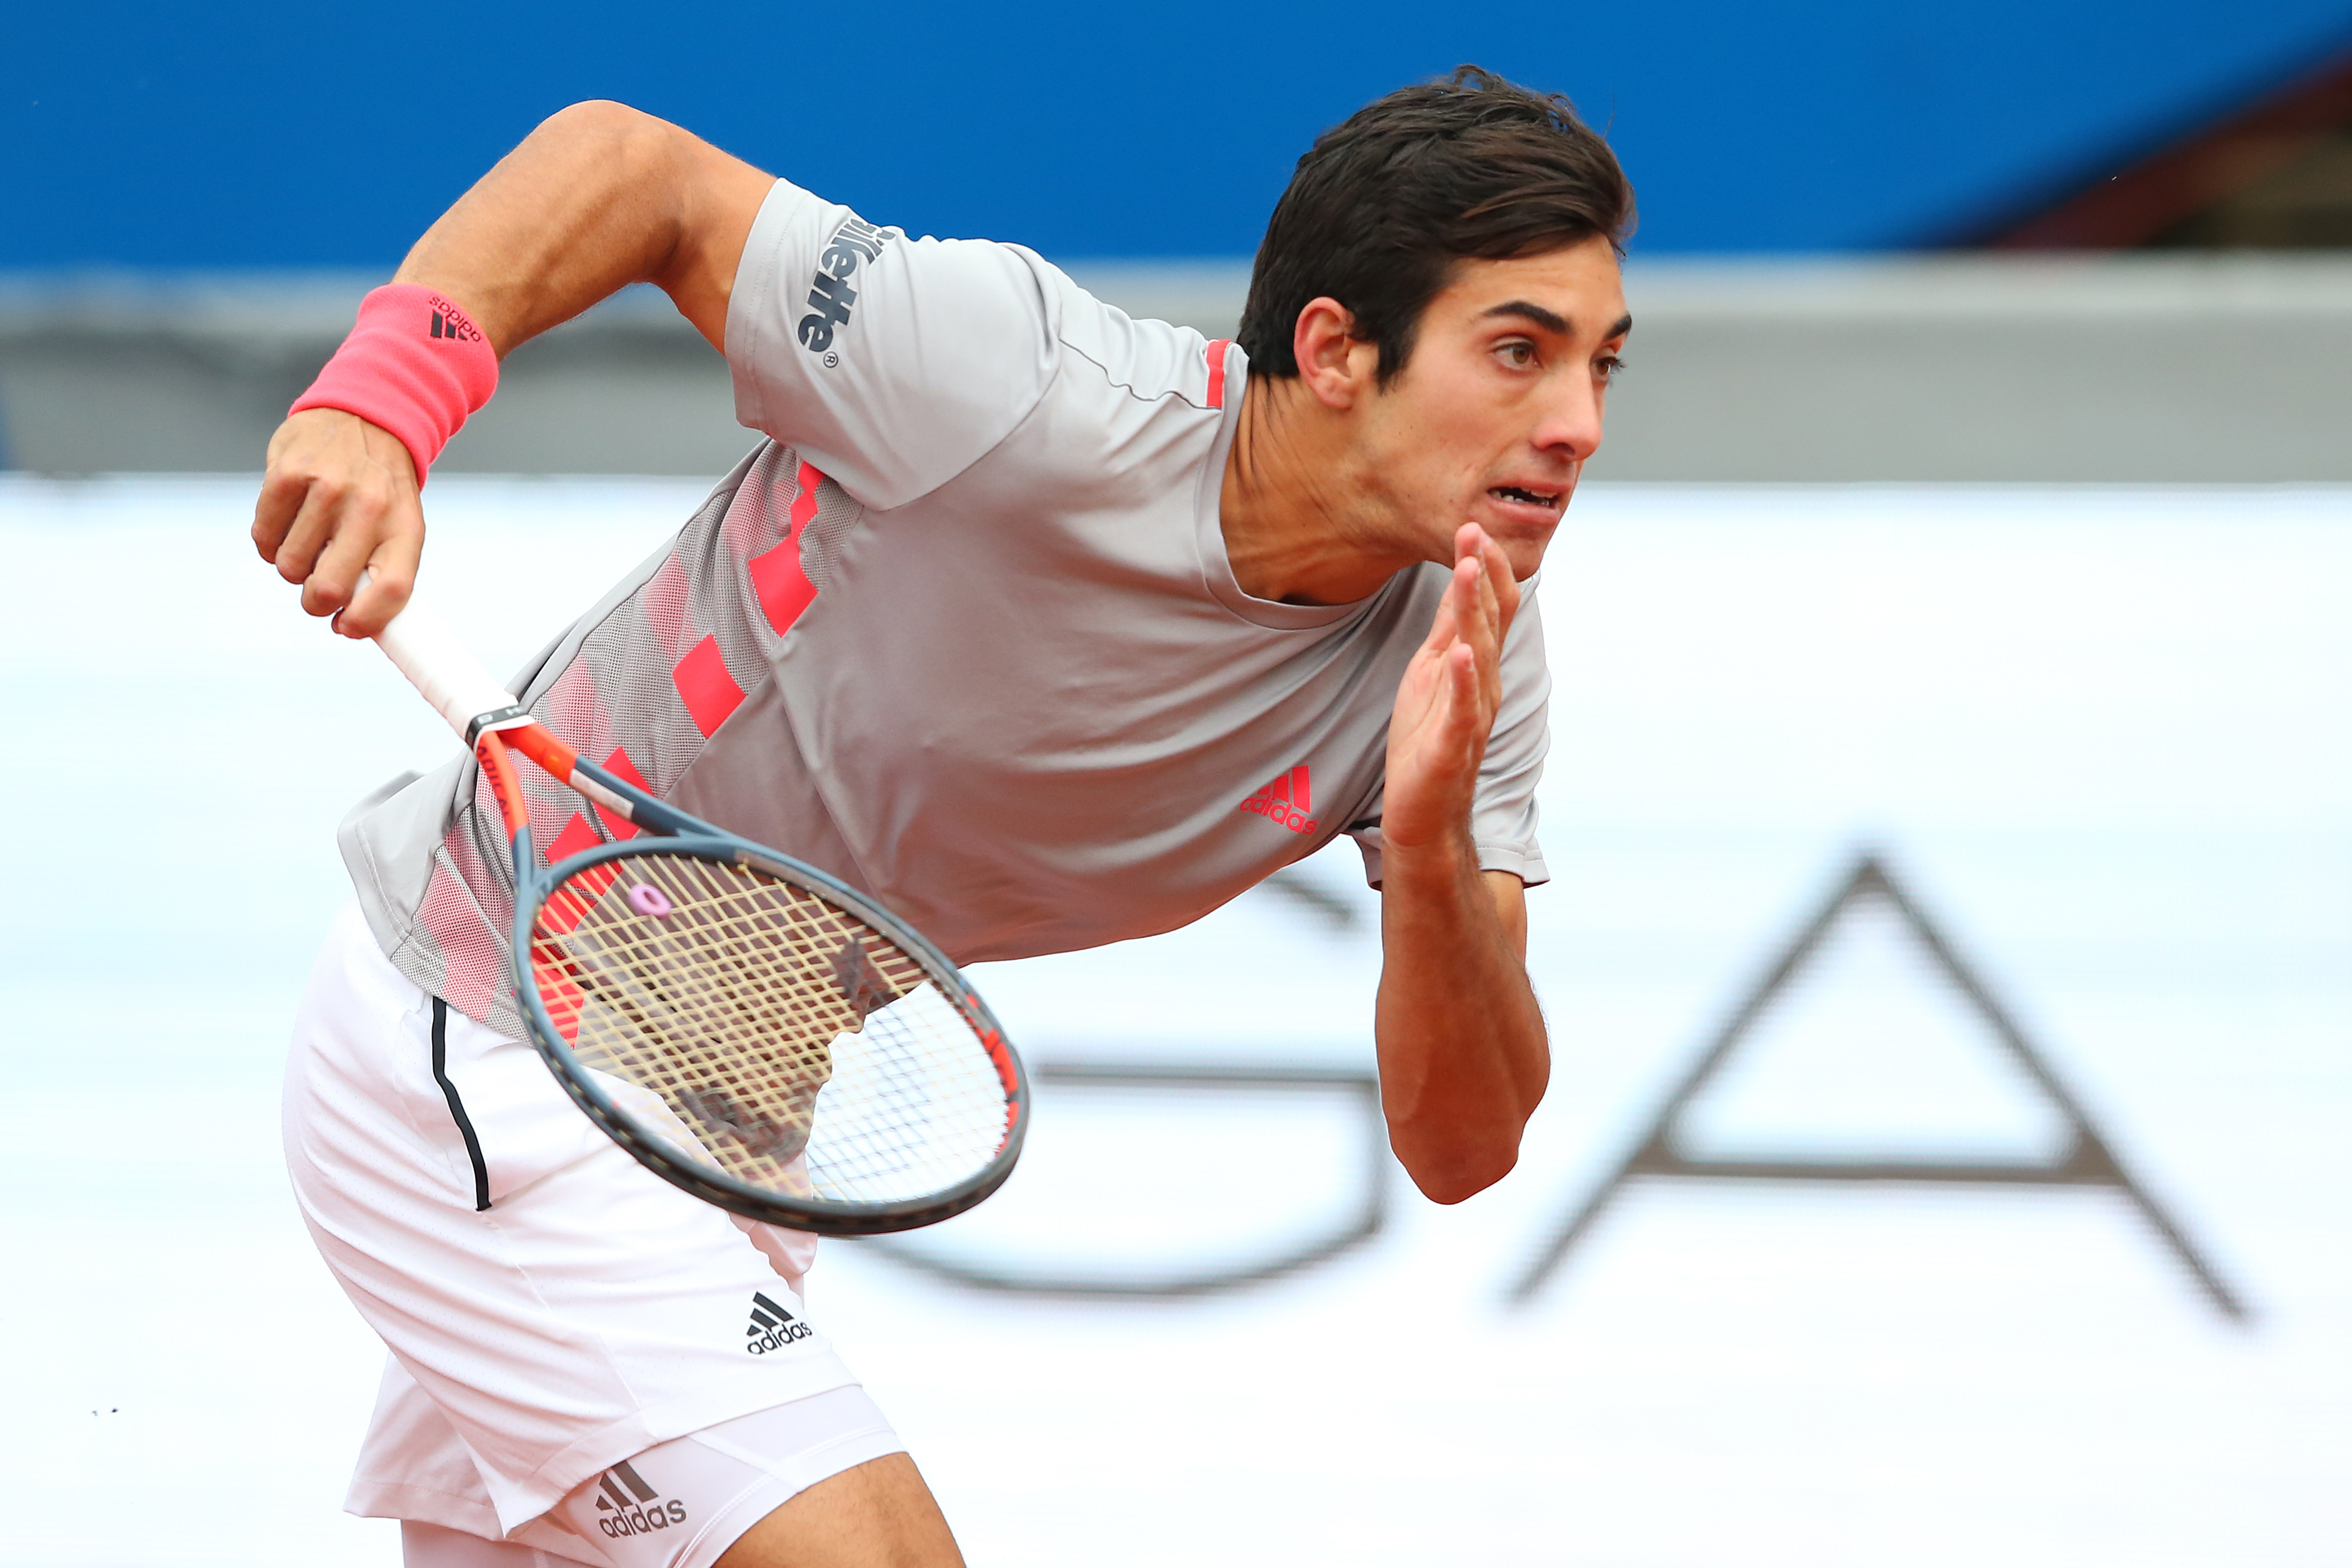 2013 French Open boys champion Garin hoping for breakthrough in Paris